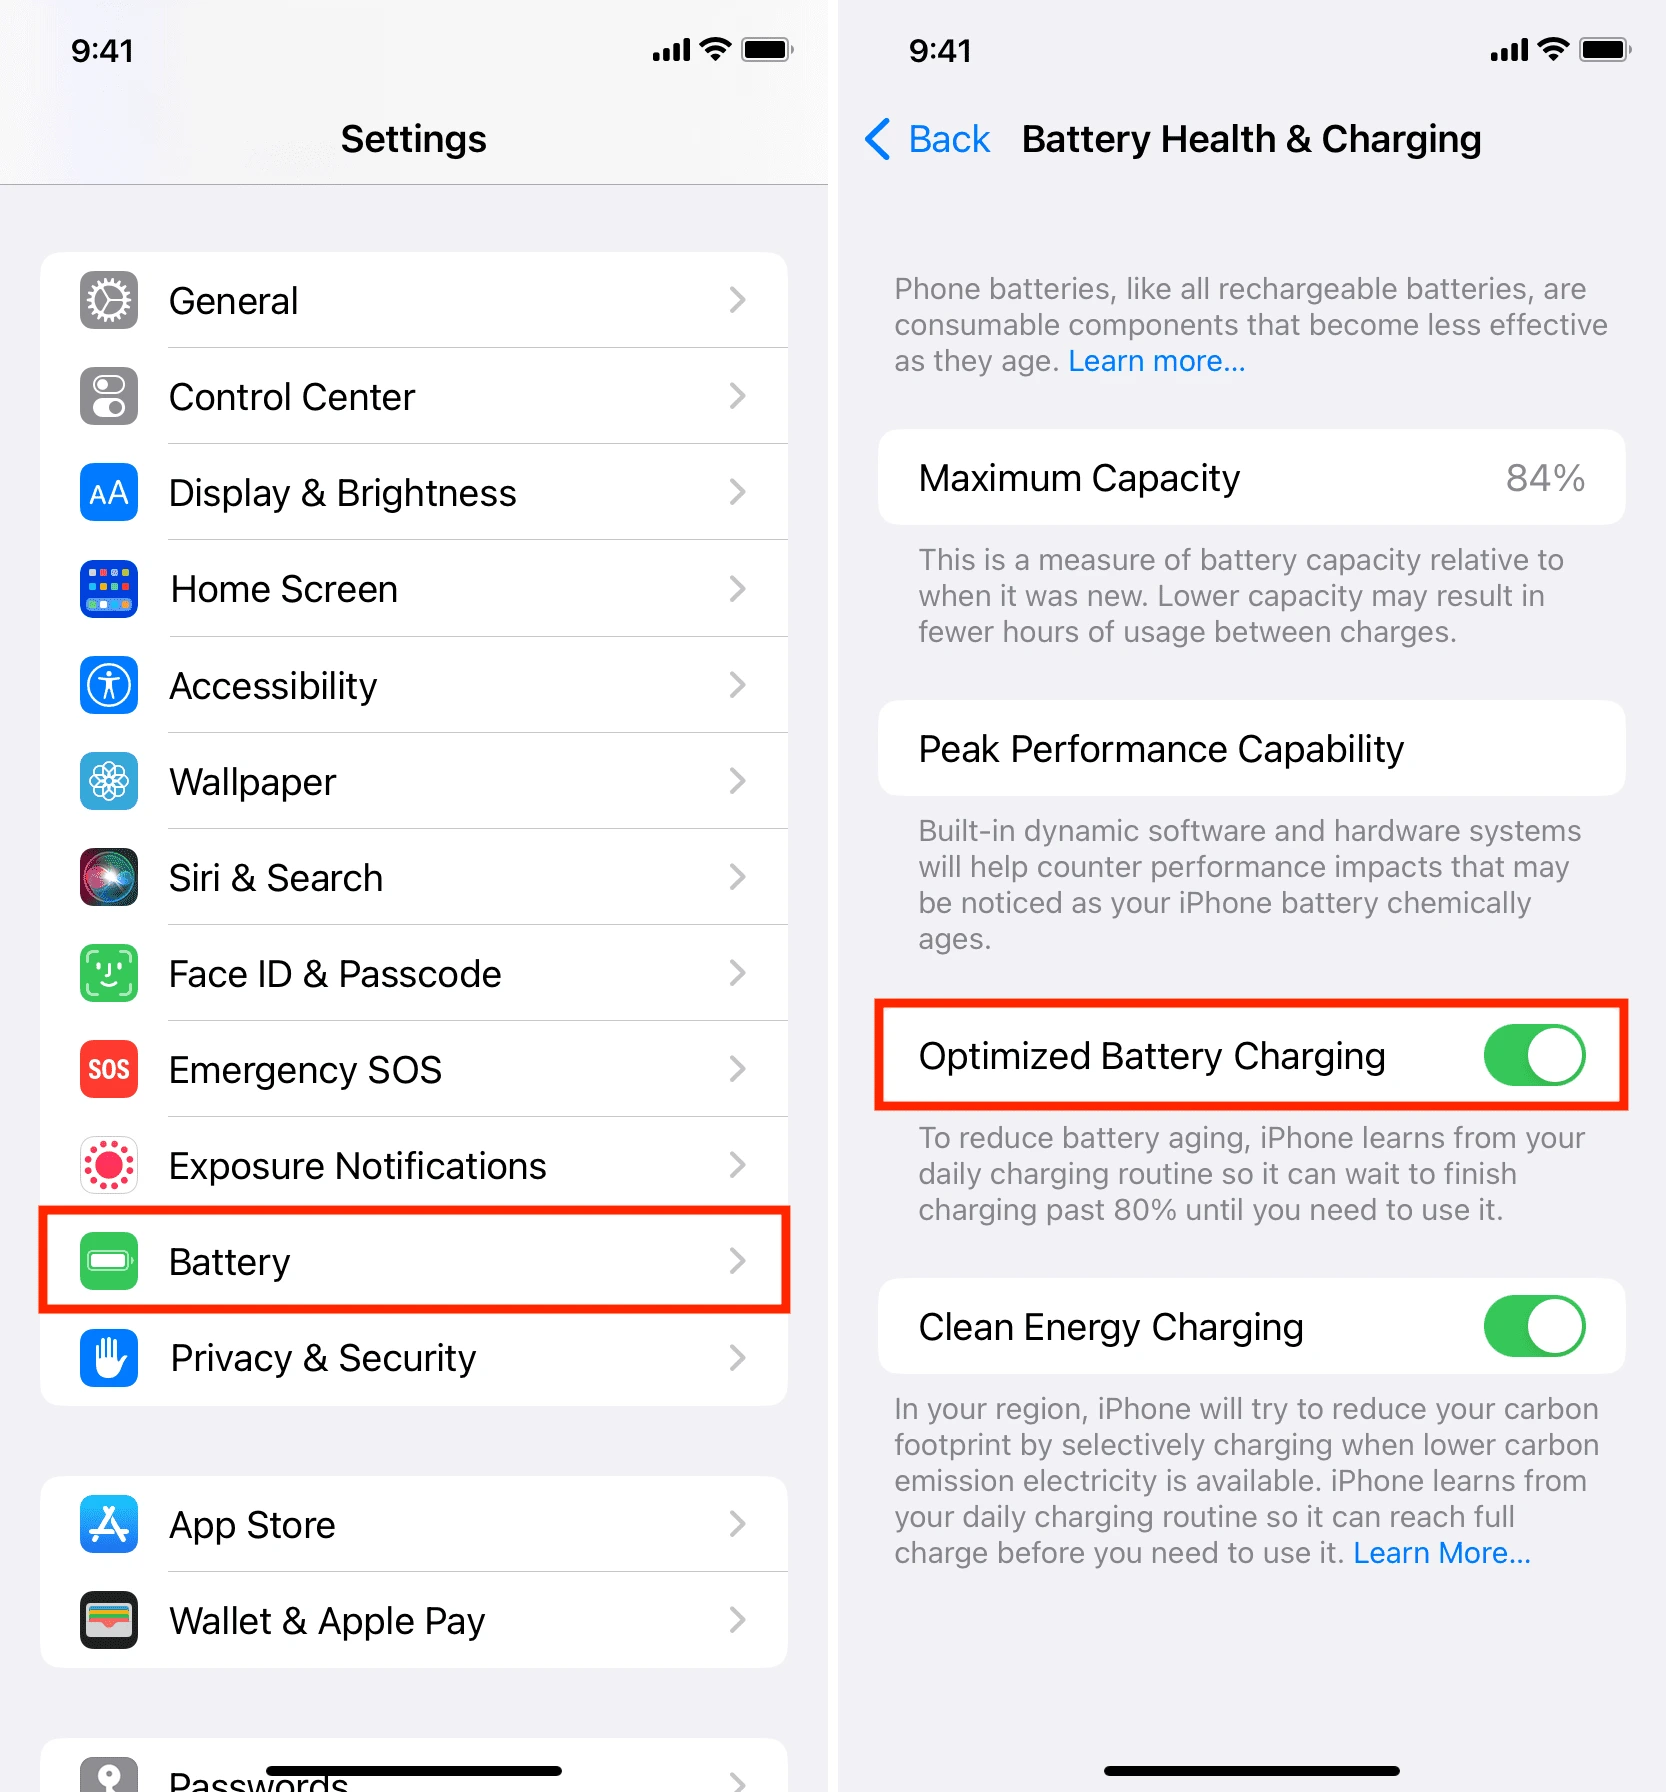 Don’t turn off Optimized Battery Charging